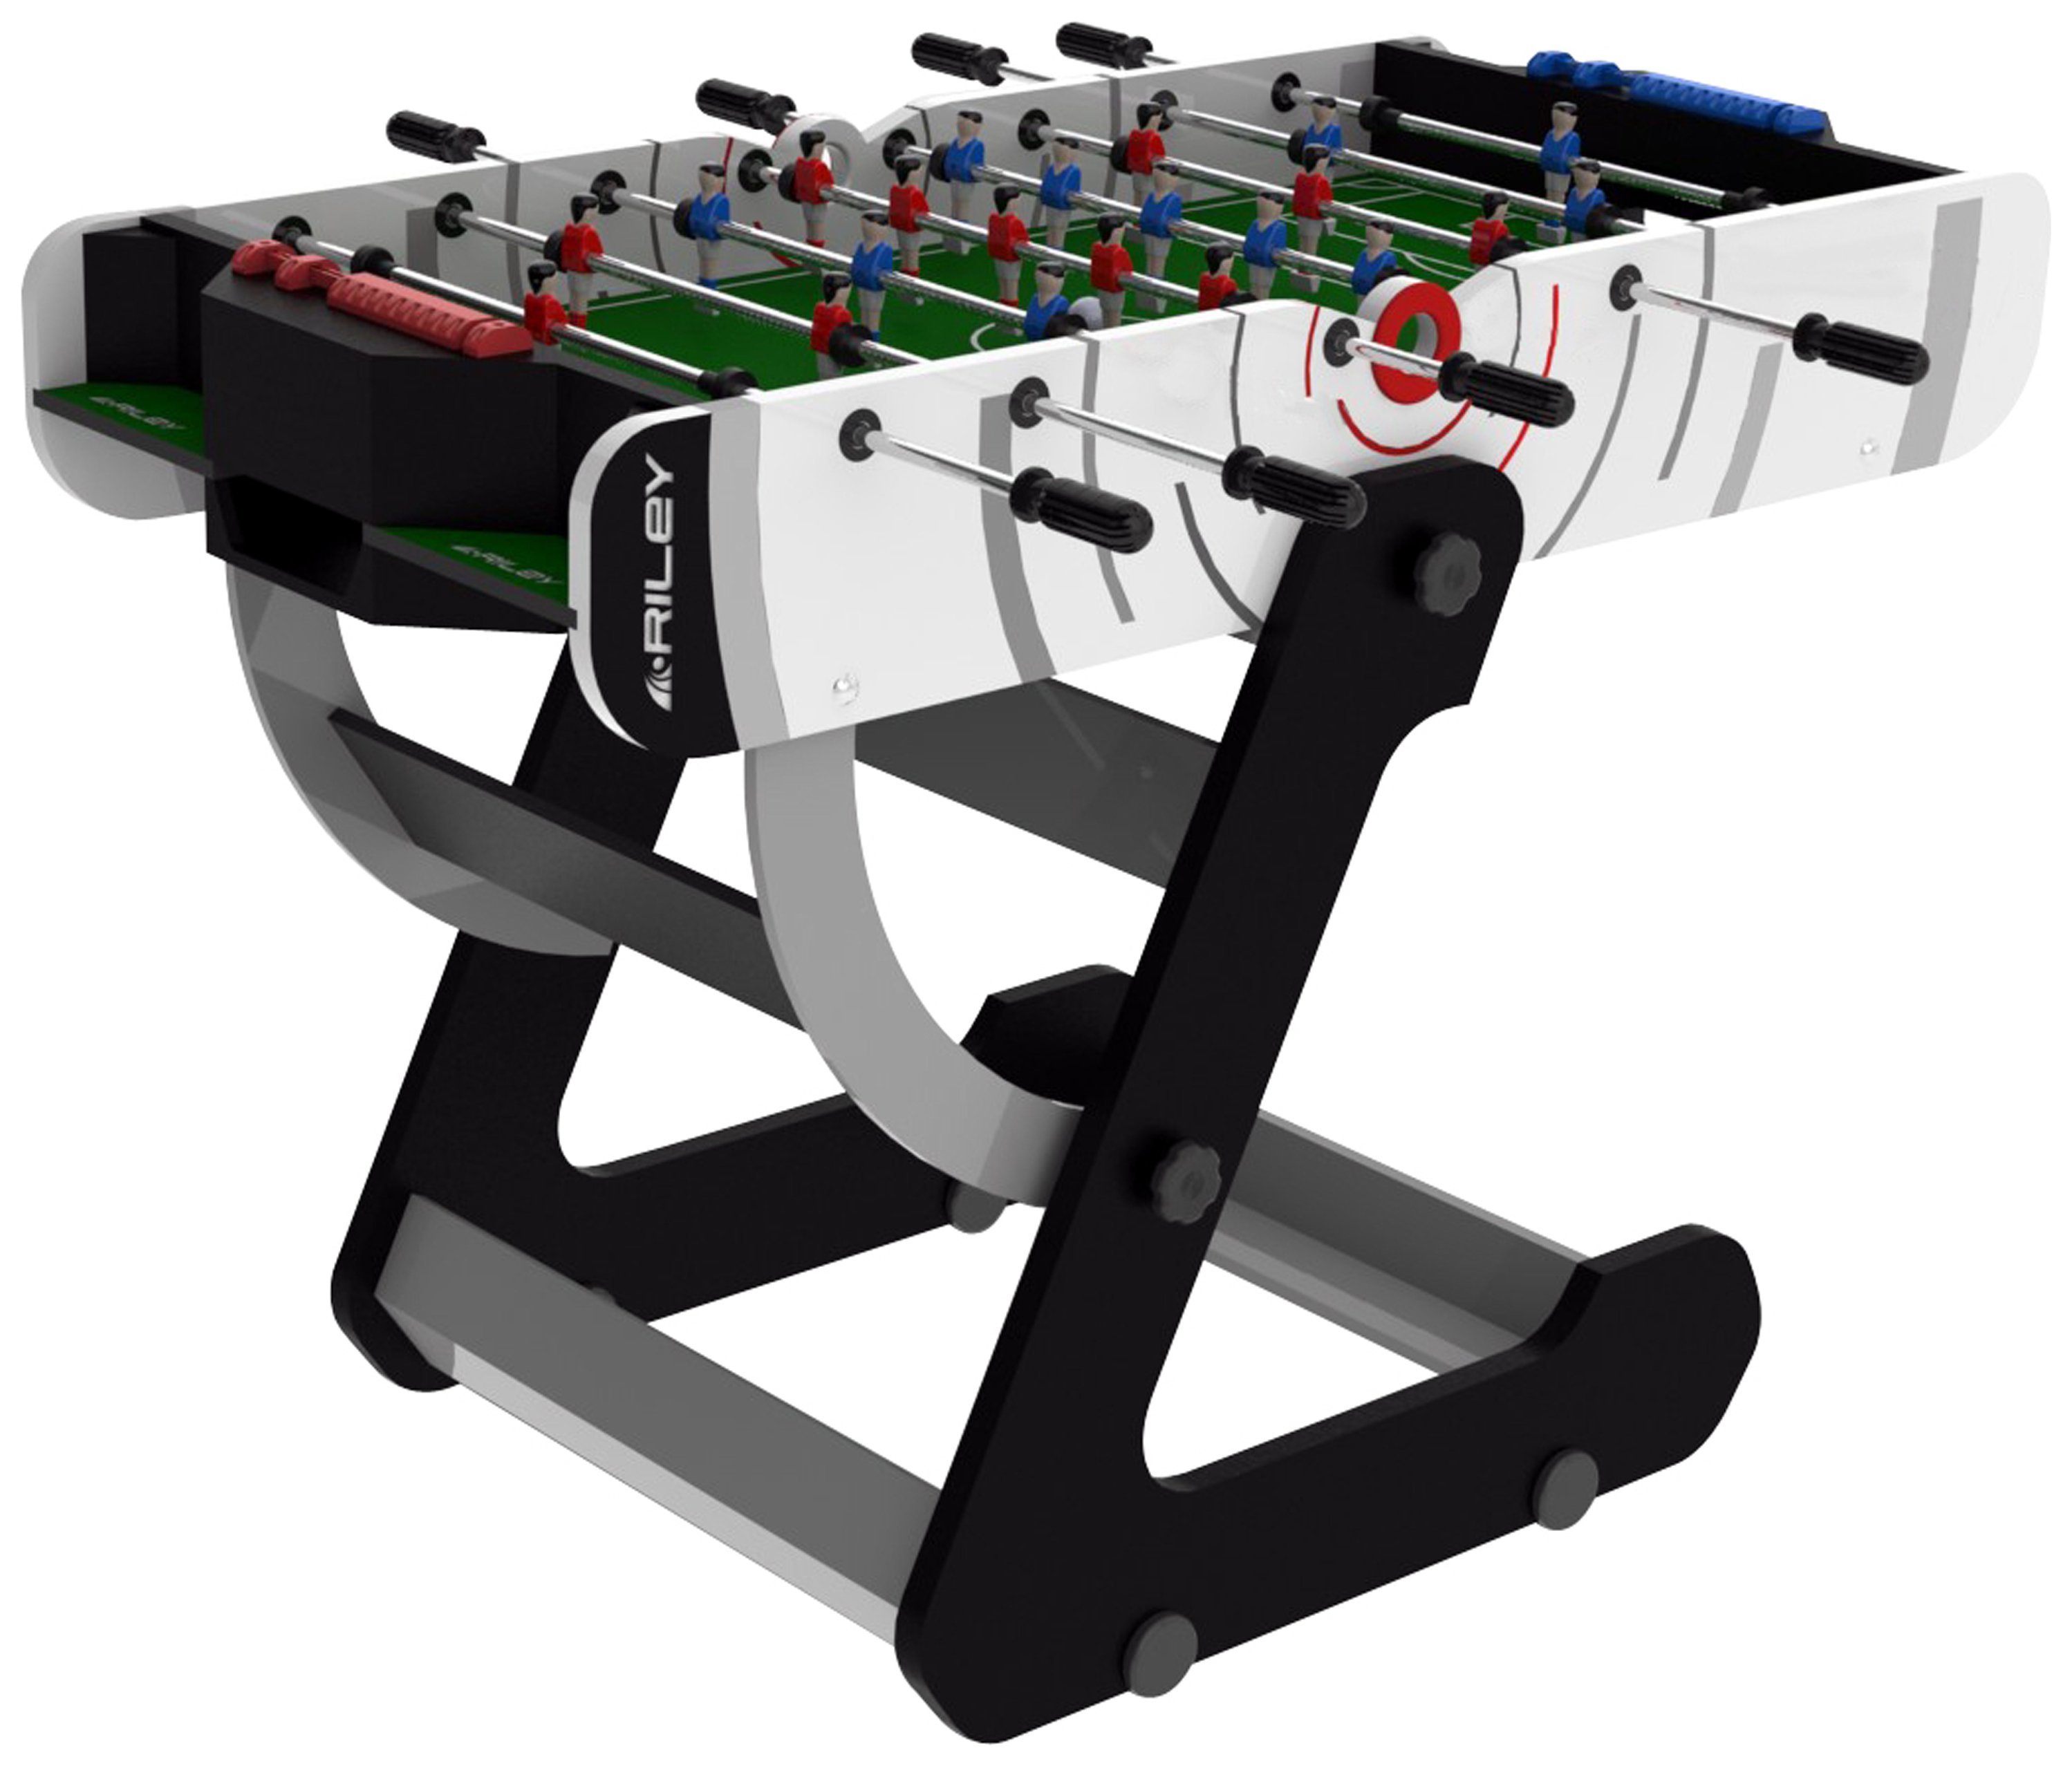 Riley VR-90 4ft Folding Football Table review